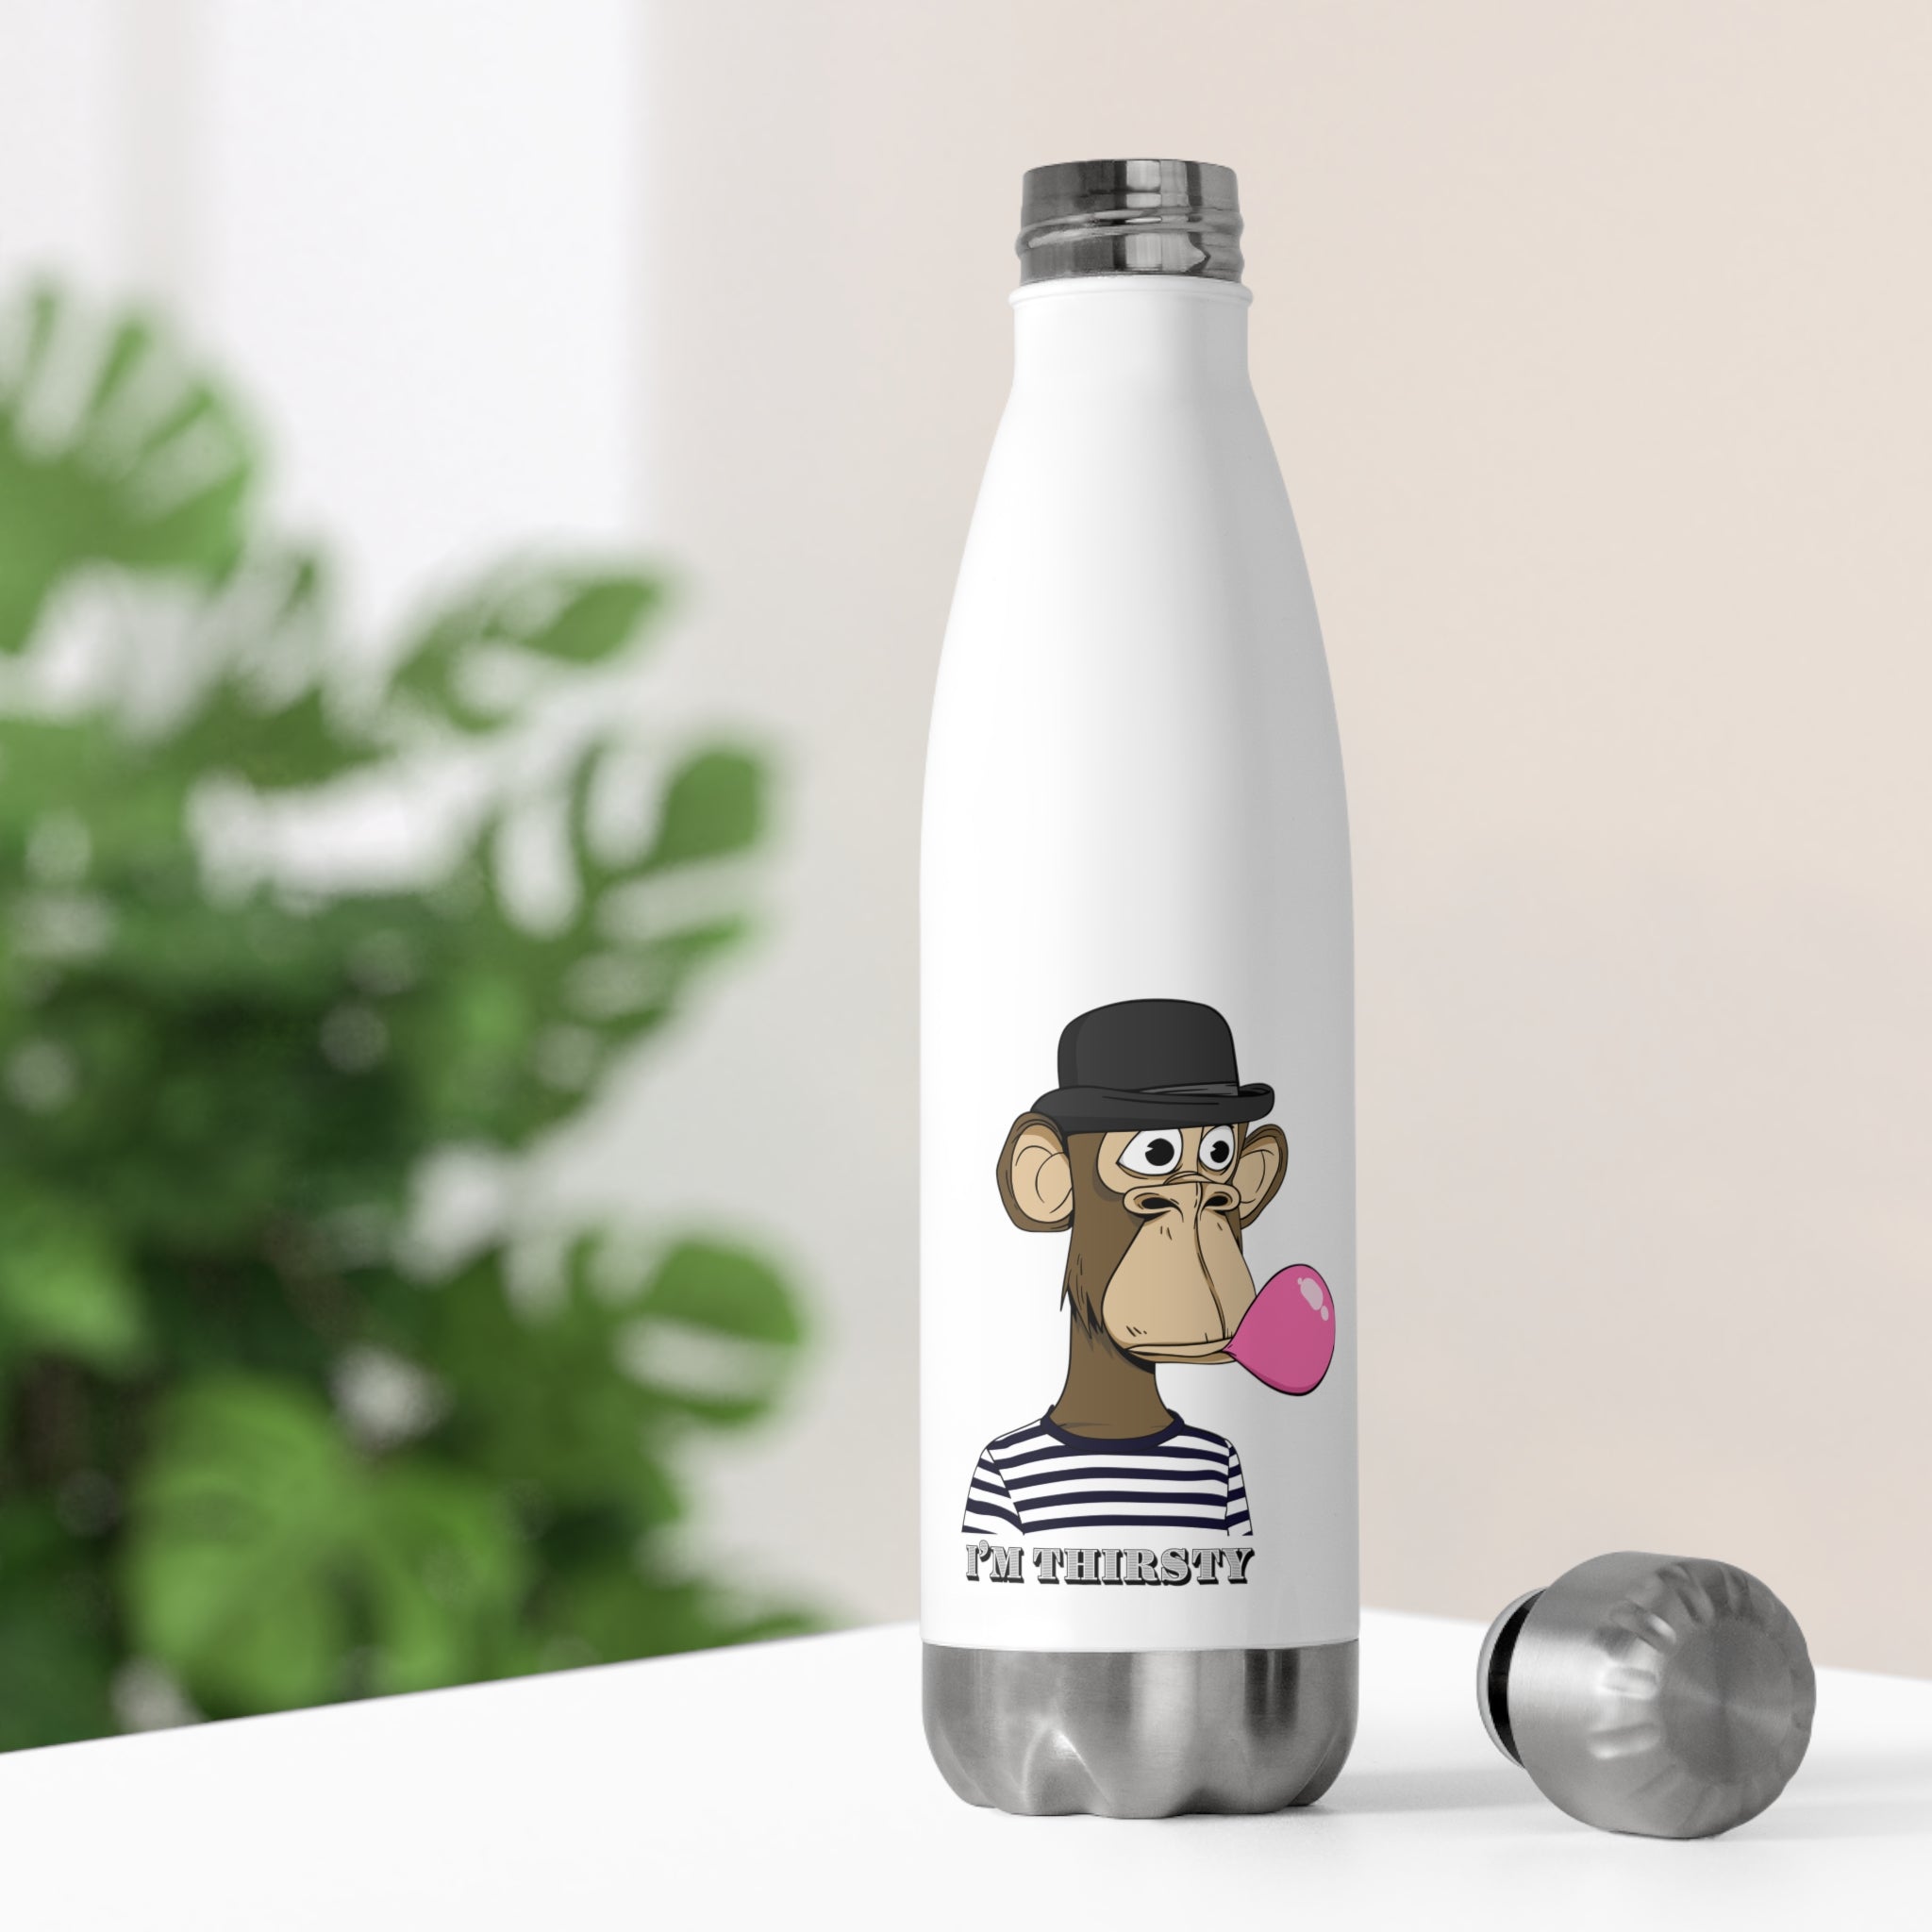 Pancho Poppins "I'm Thirsty"20oz Insulated Bottle